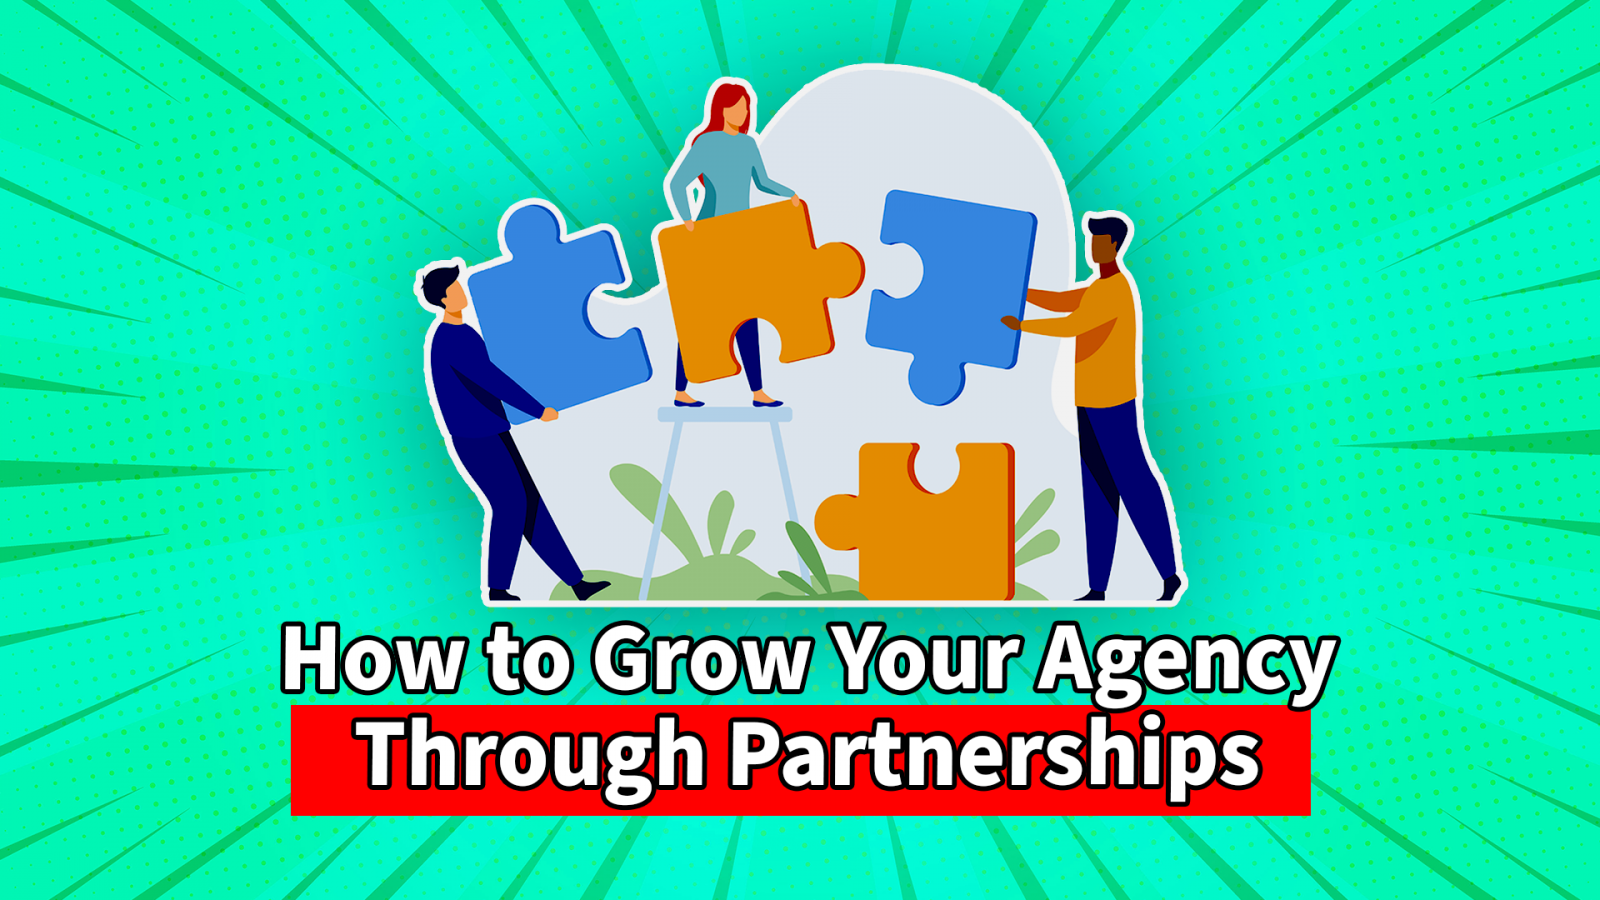 Grow Your Agency Together